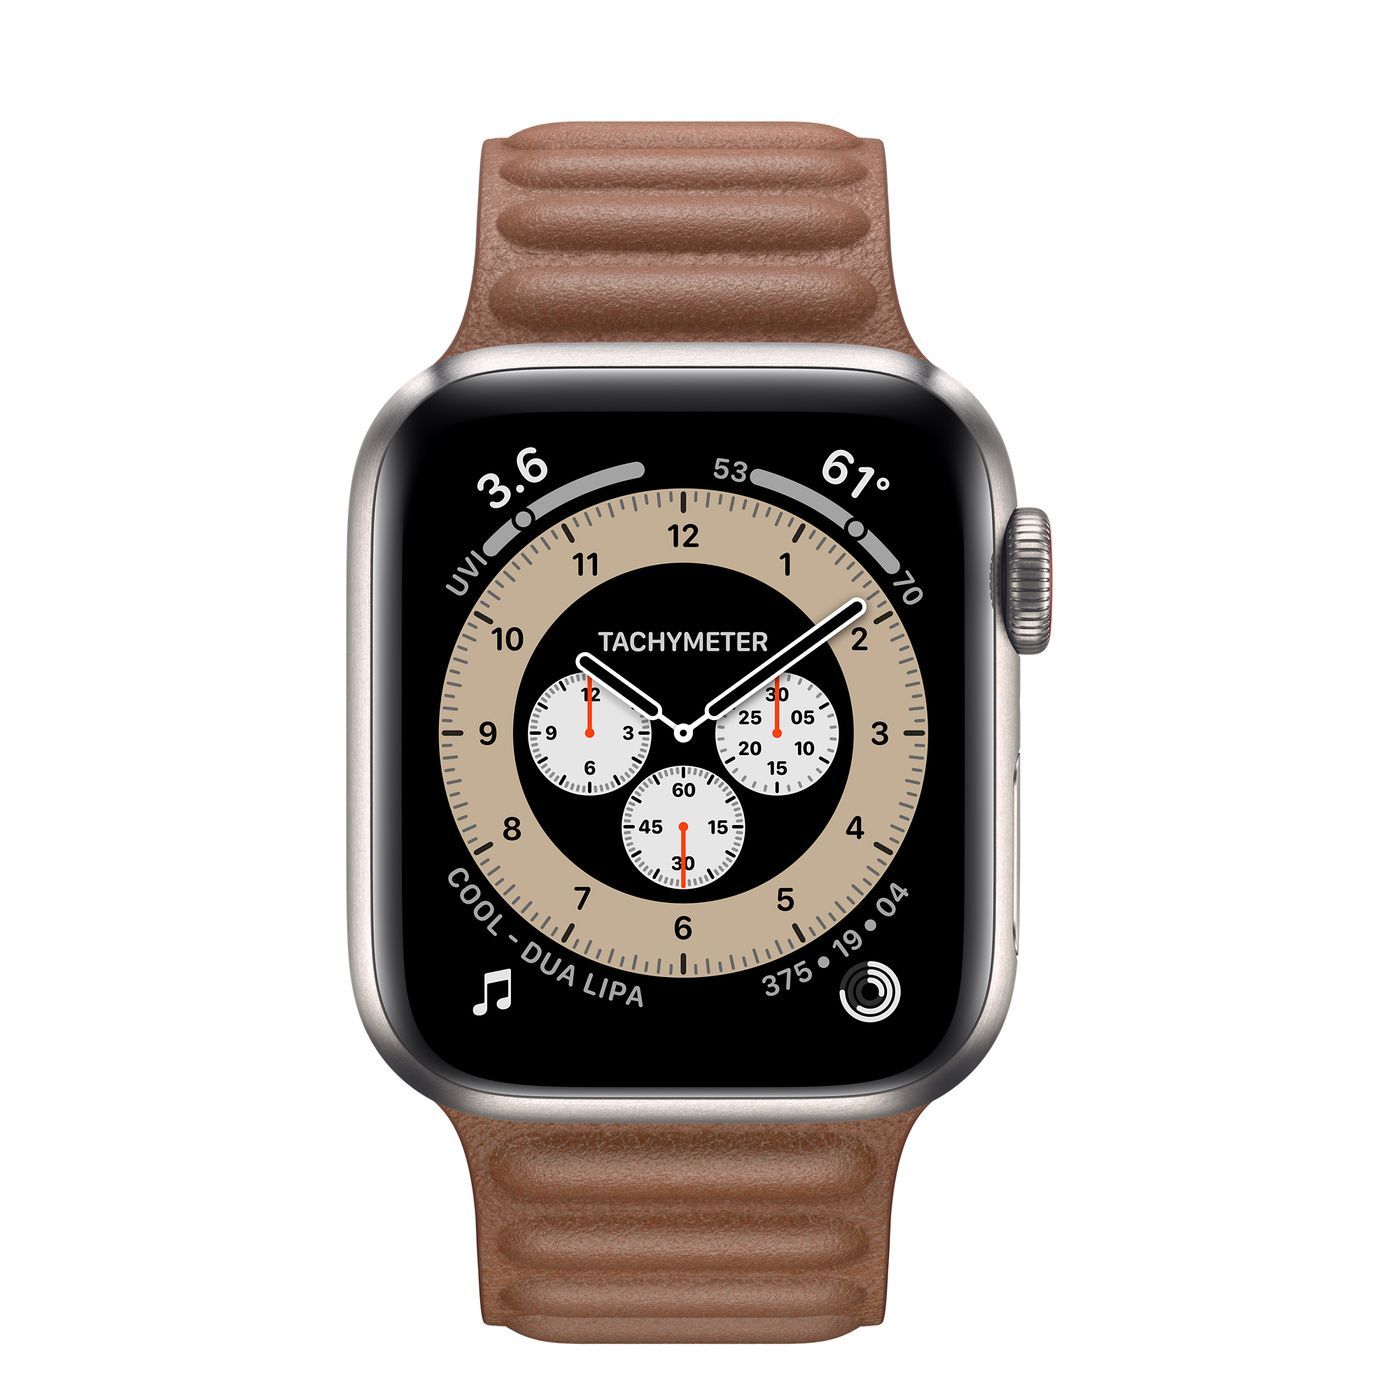 Louis Vuitton goes upmarket in smartwatch fight with Apple